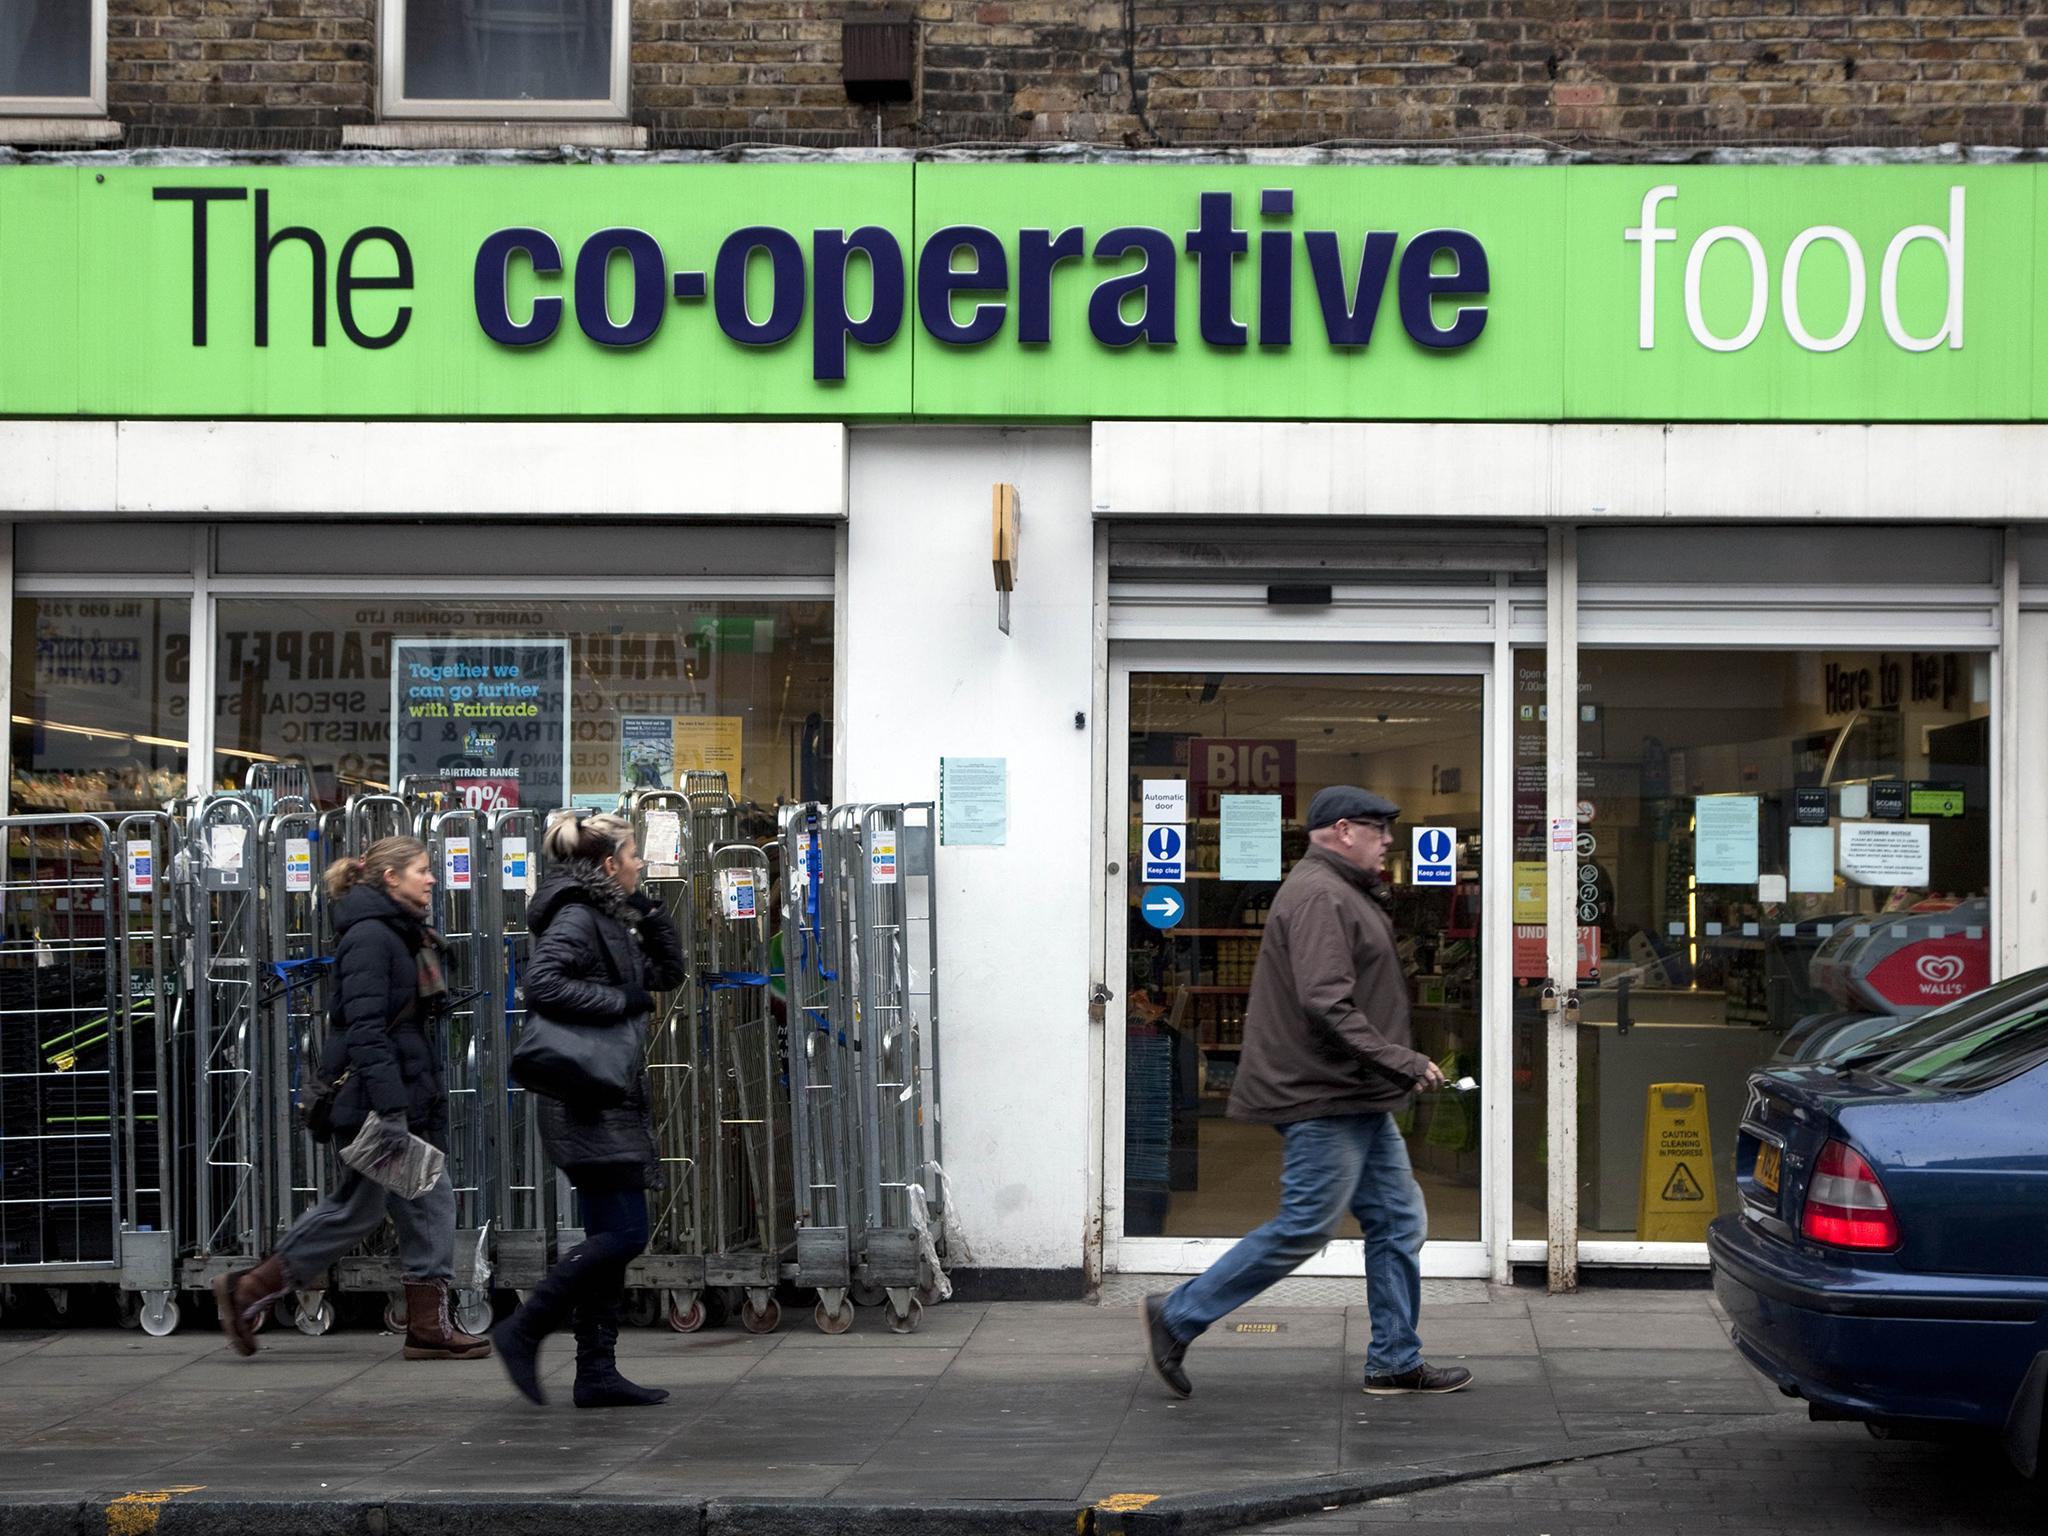 Nisa shopkeepers will be able to select Co-op products to sell